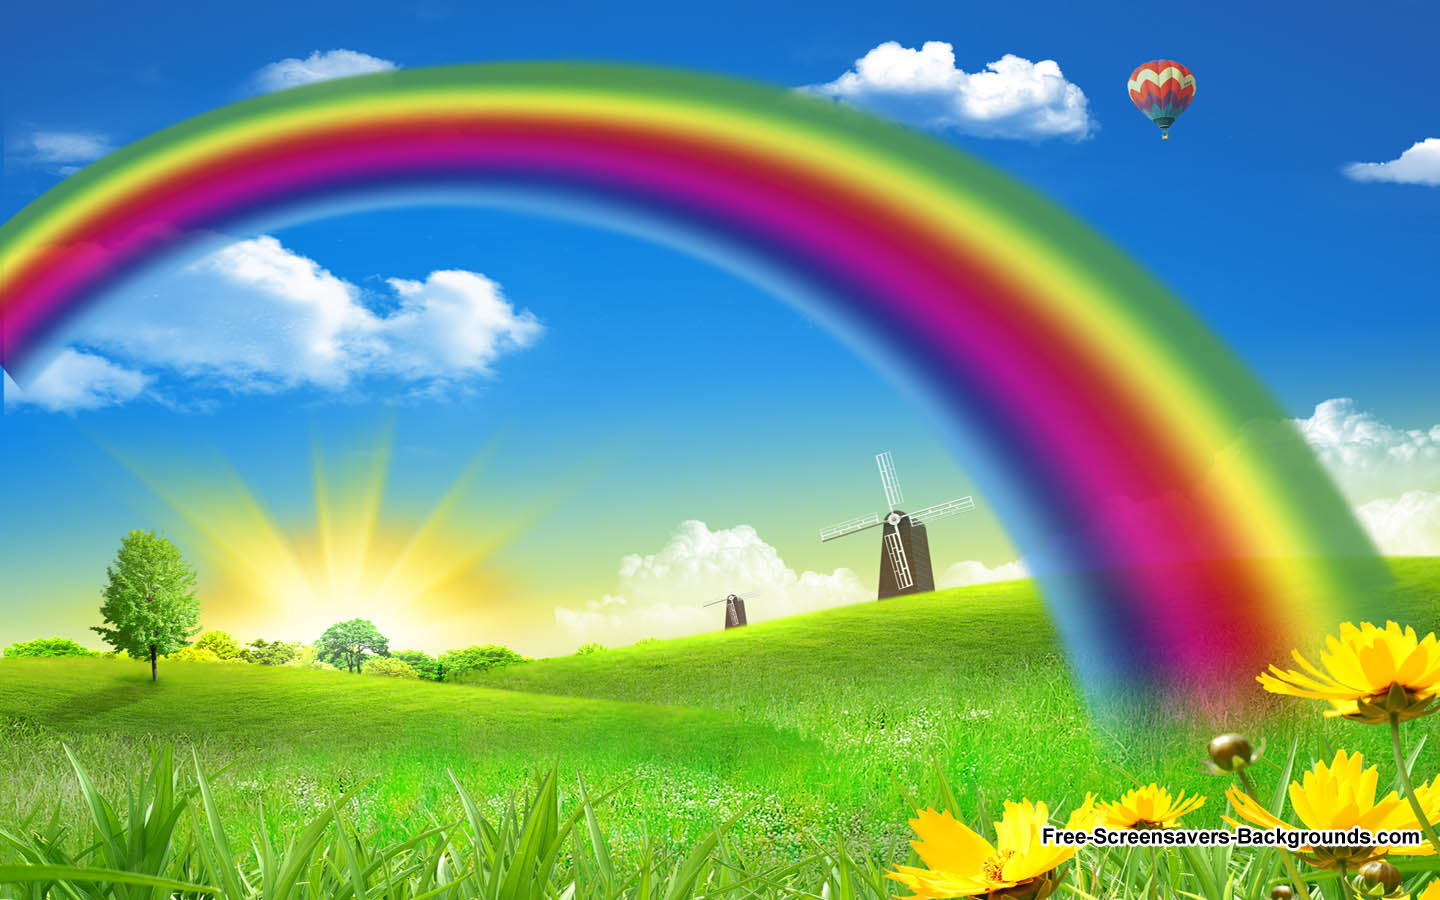 Rainbow Screensavers And Background